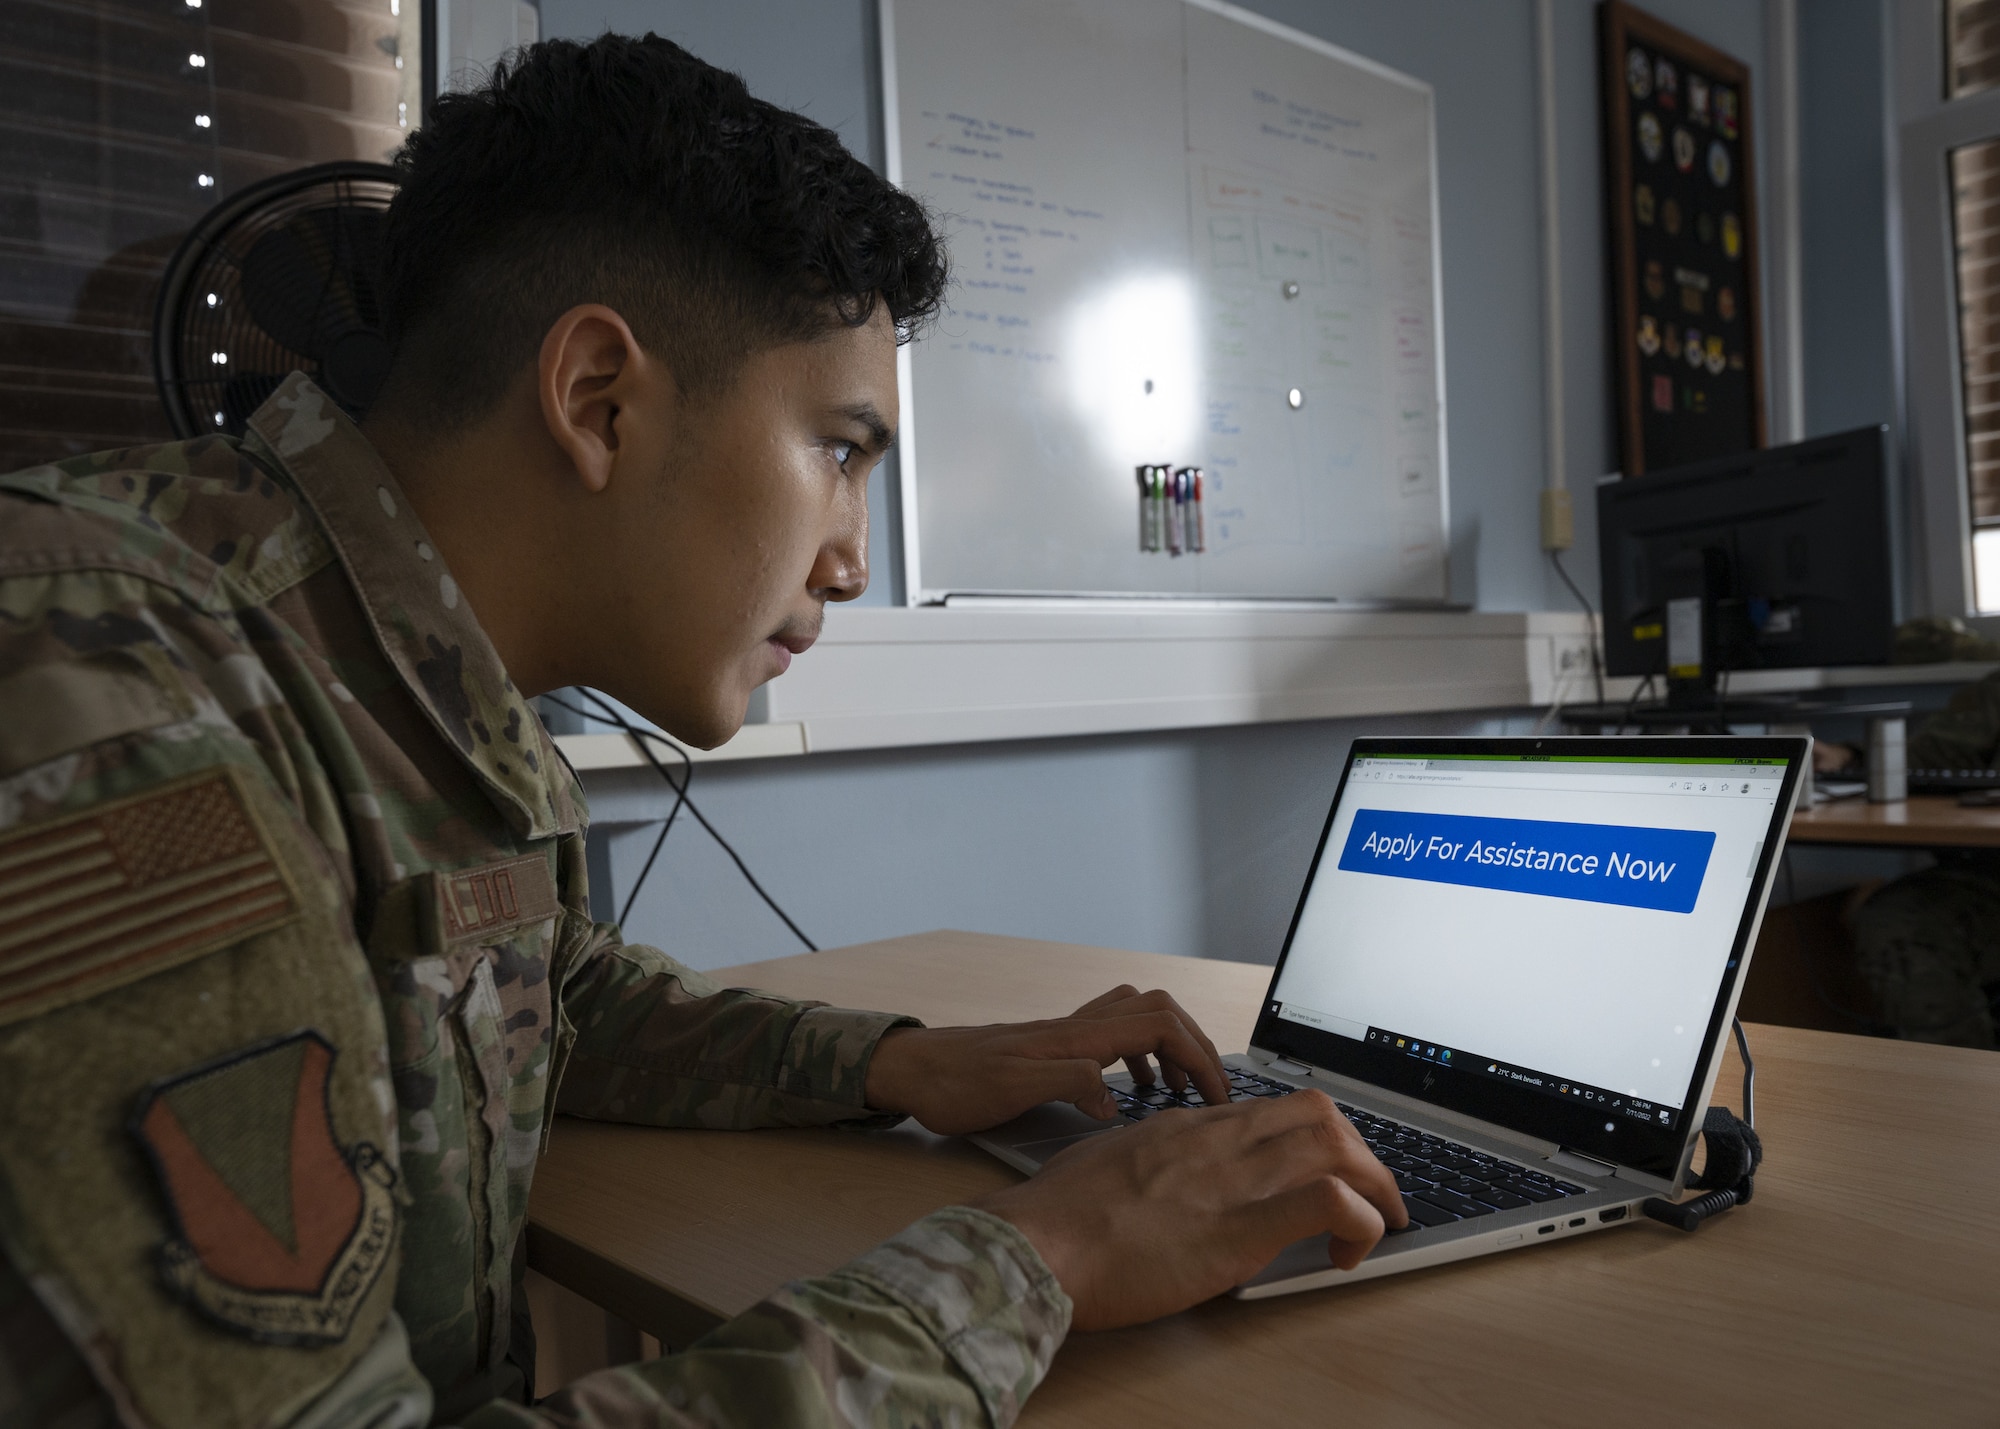 An Airman applies online for Air Force Aid Society assistance at Ramstein Air Base, Germany, July 12, 2022. The new online
application process was put into place to give military members 24-hour access to apply online rather than coming into the
Military and Family Readiness center during the duty day. (U.S. Air Force photo by Senior Airman Andrew Bertain)